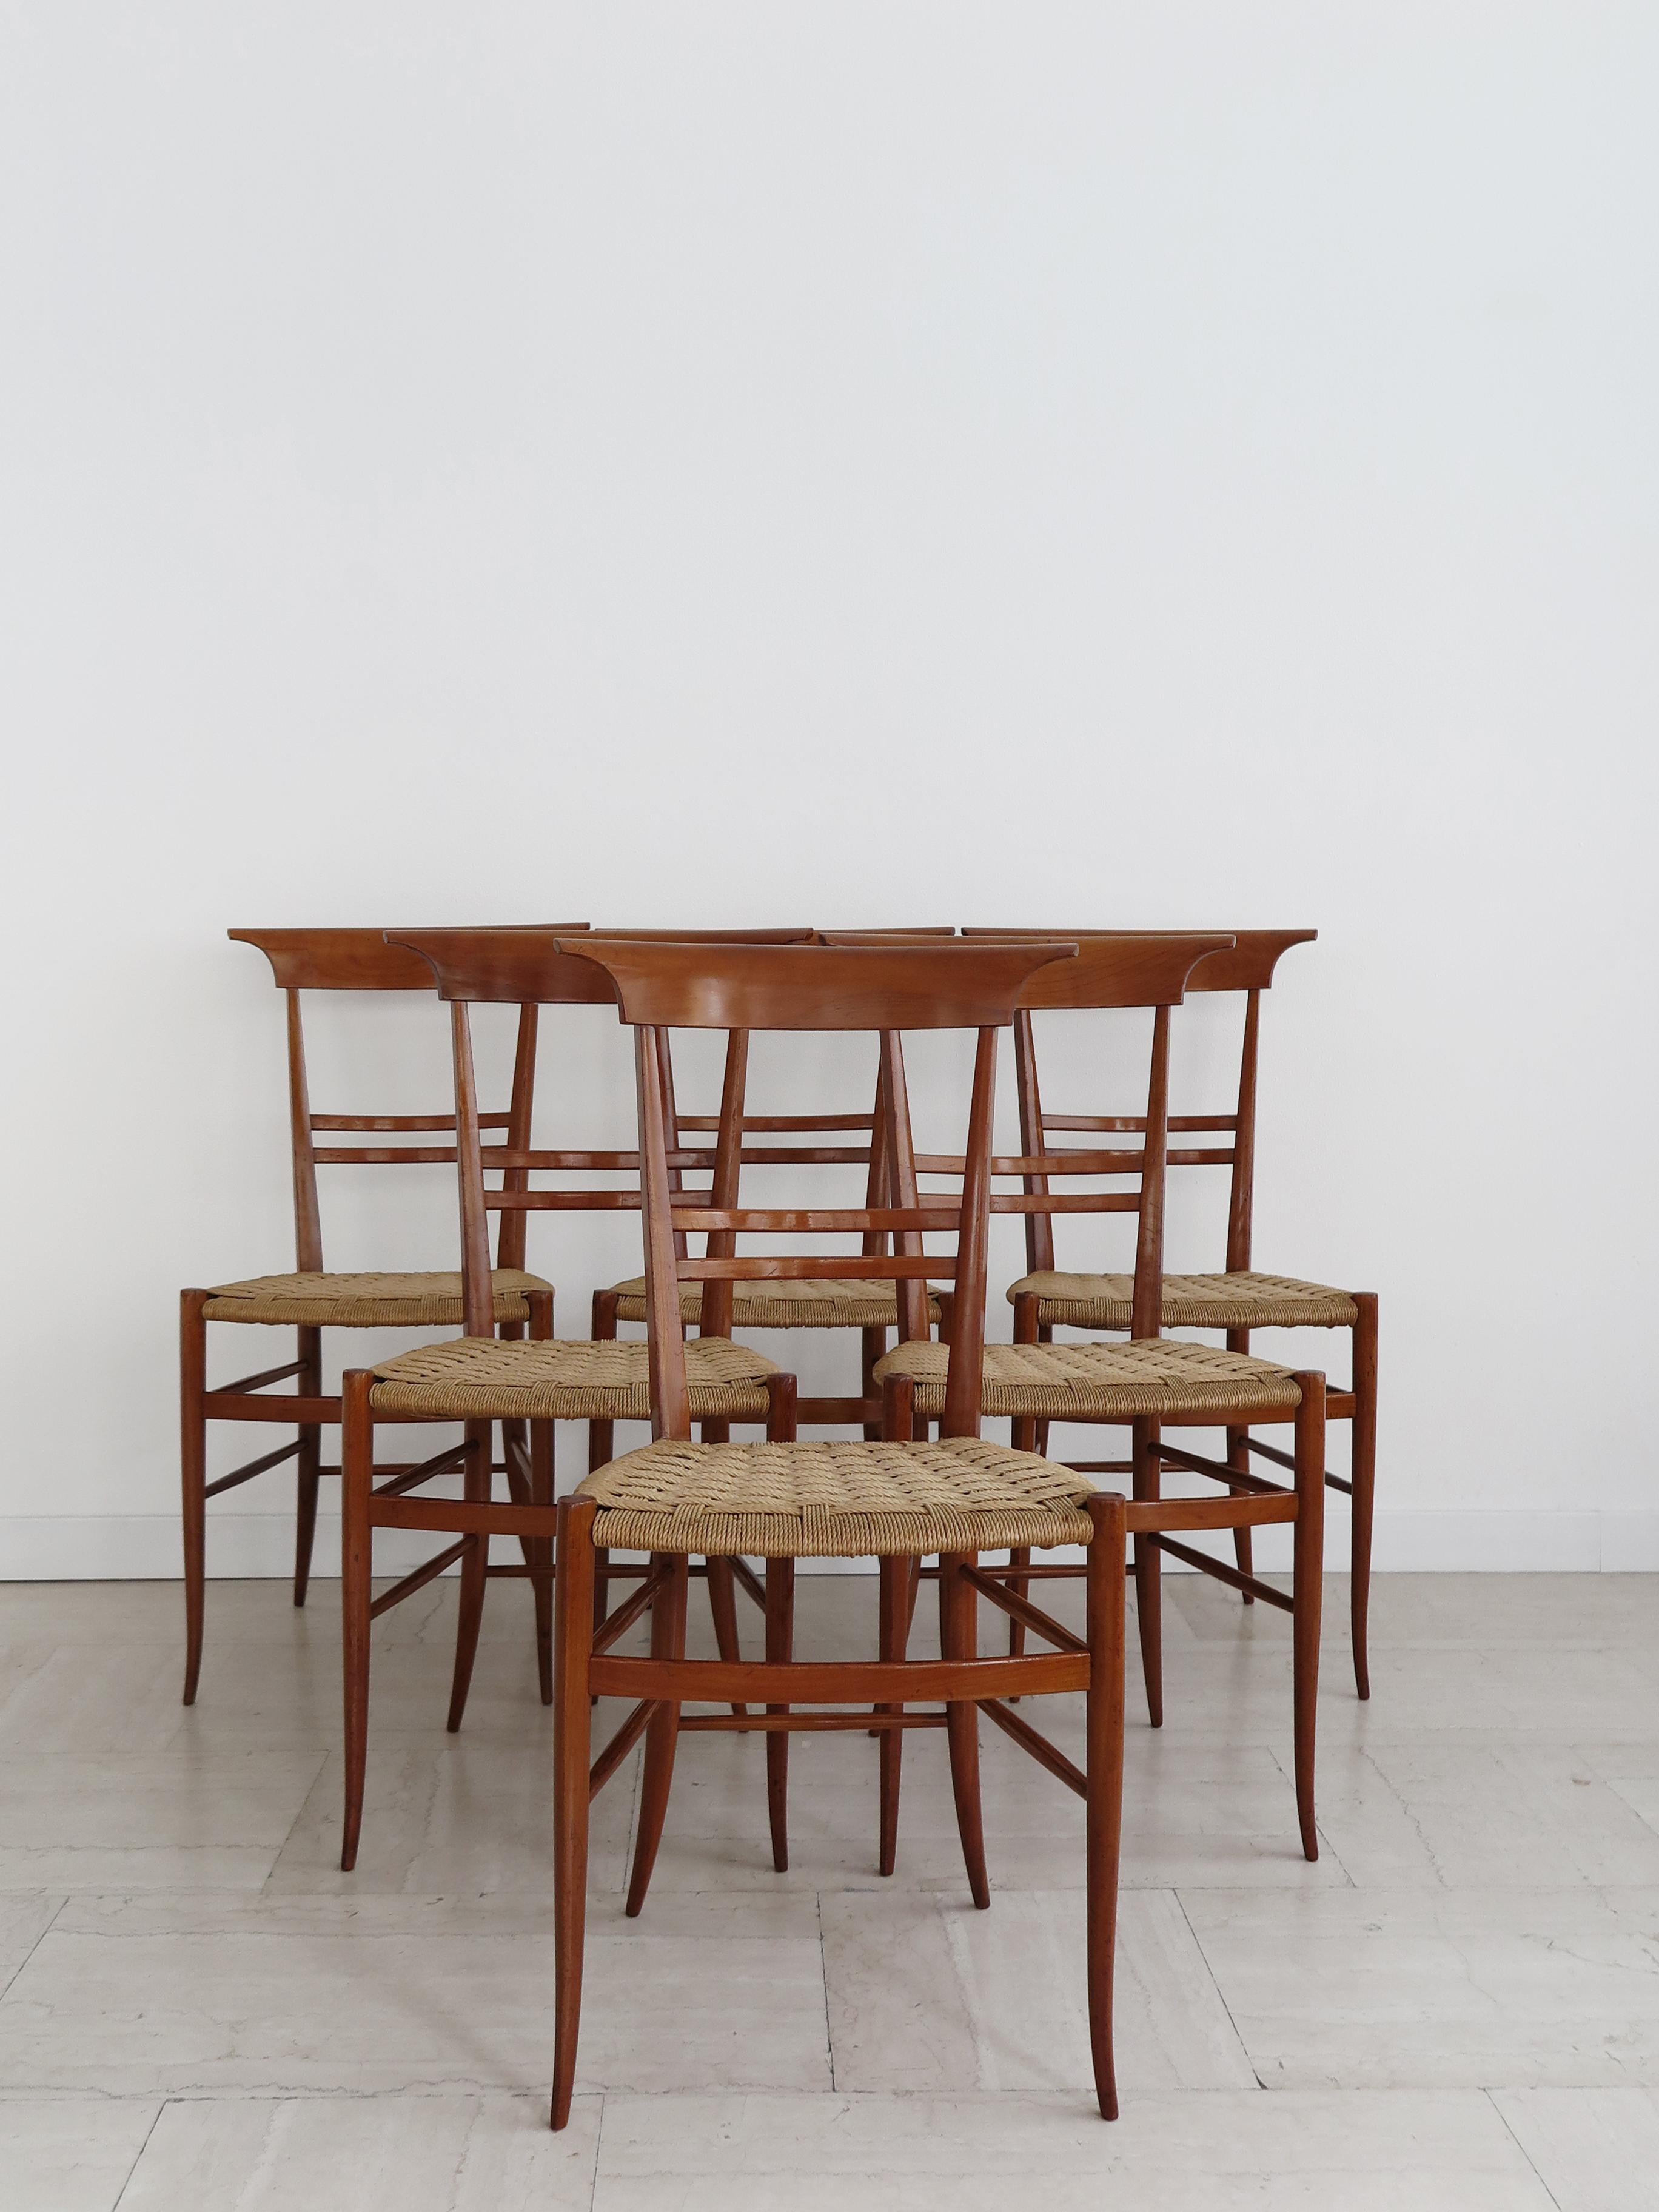 Set of six Italian Mid-Century Modern design dining chairs with wooden frame and rope seat, Italy 1960s.

Please note that the lset is original of the period and this shows normal signs of age and use.